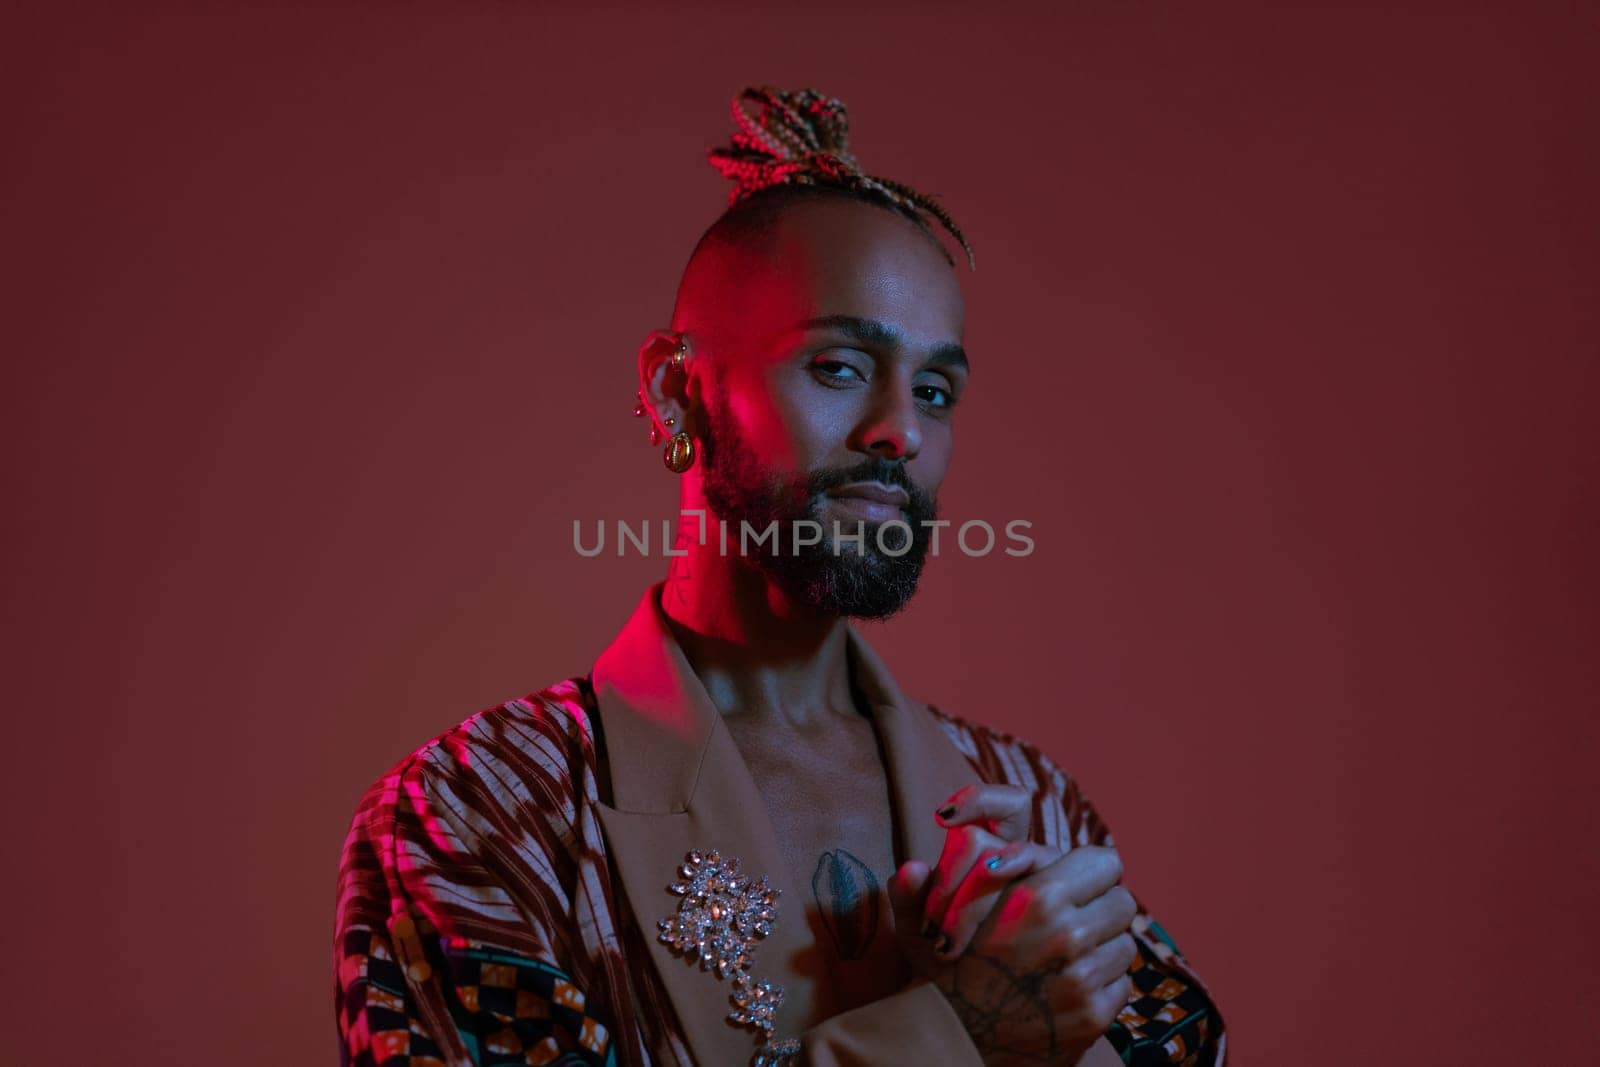 Retro wave or synth wave portrait young happy serious african-american man at studio. High Fashion male model in colorful bright neon lights posing.